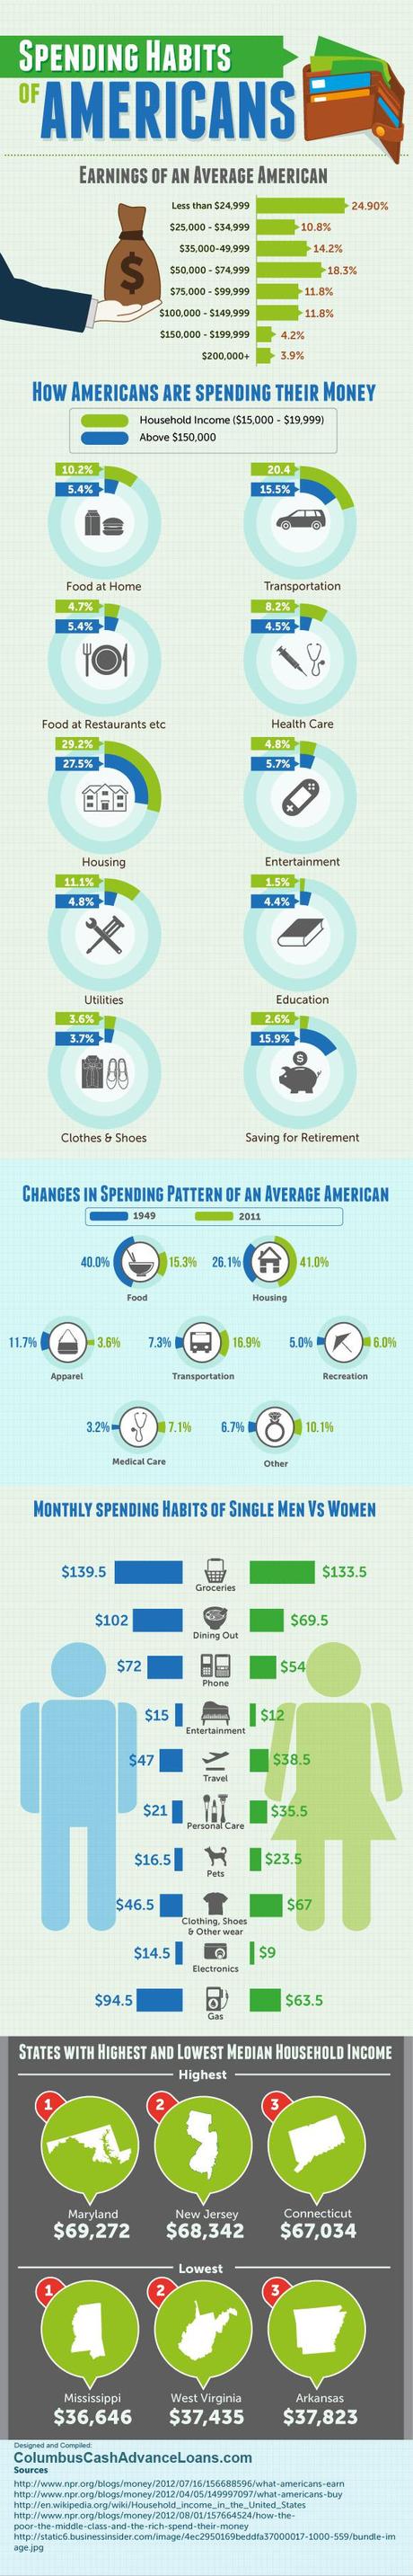 Spending Habits of Americans Infographic